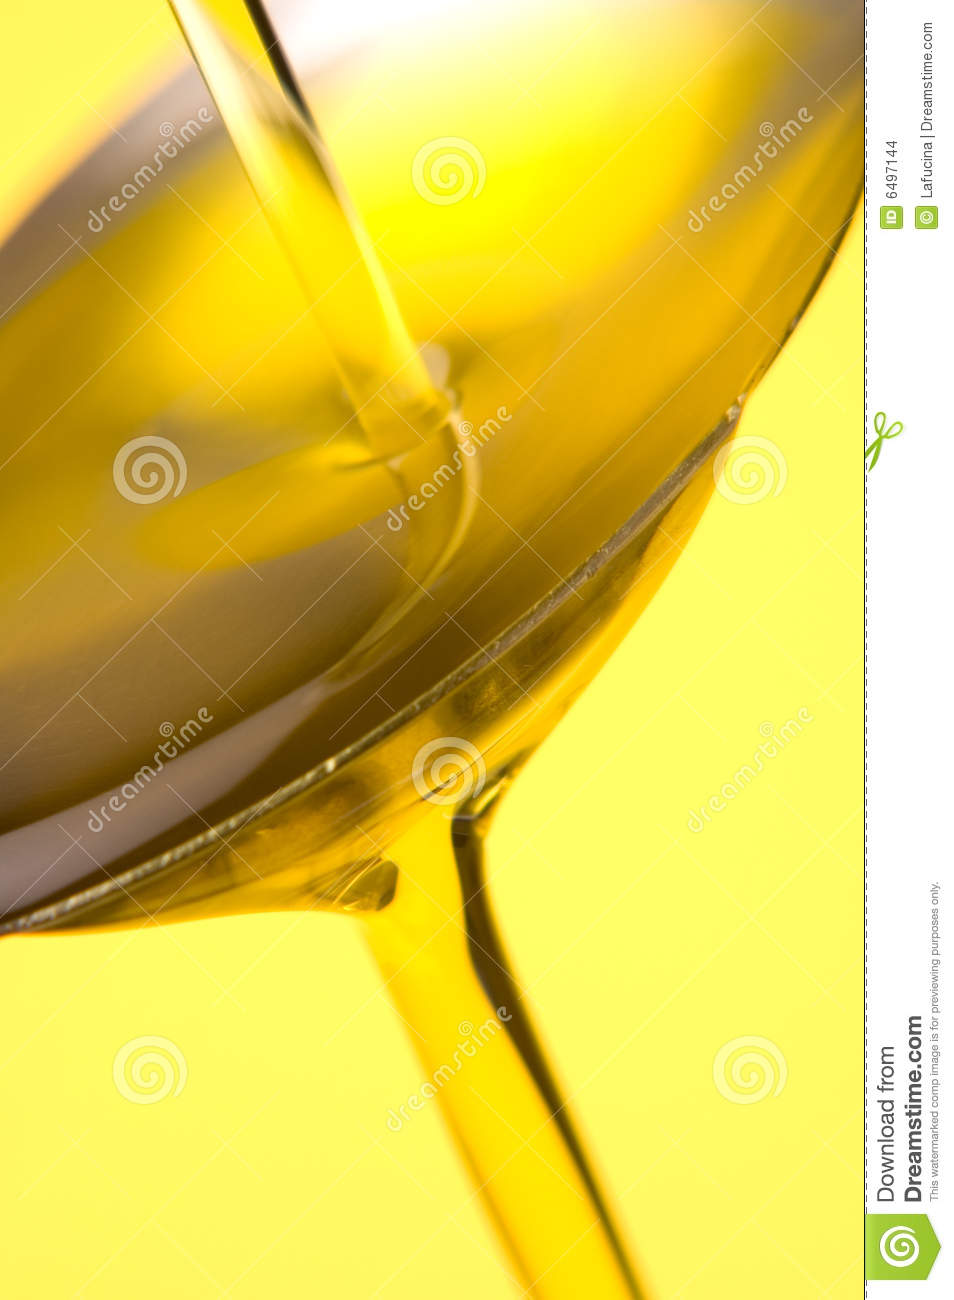 An Olive Oil Waterfall On Yellow Backgrounds